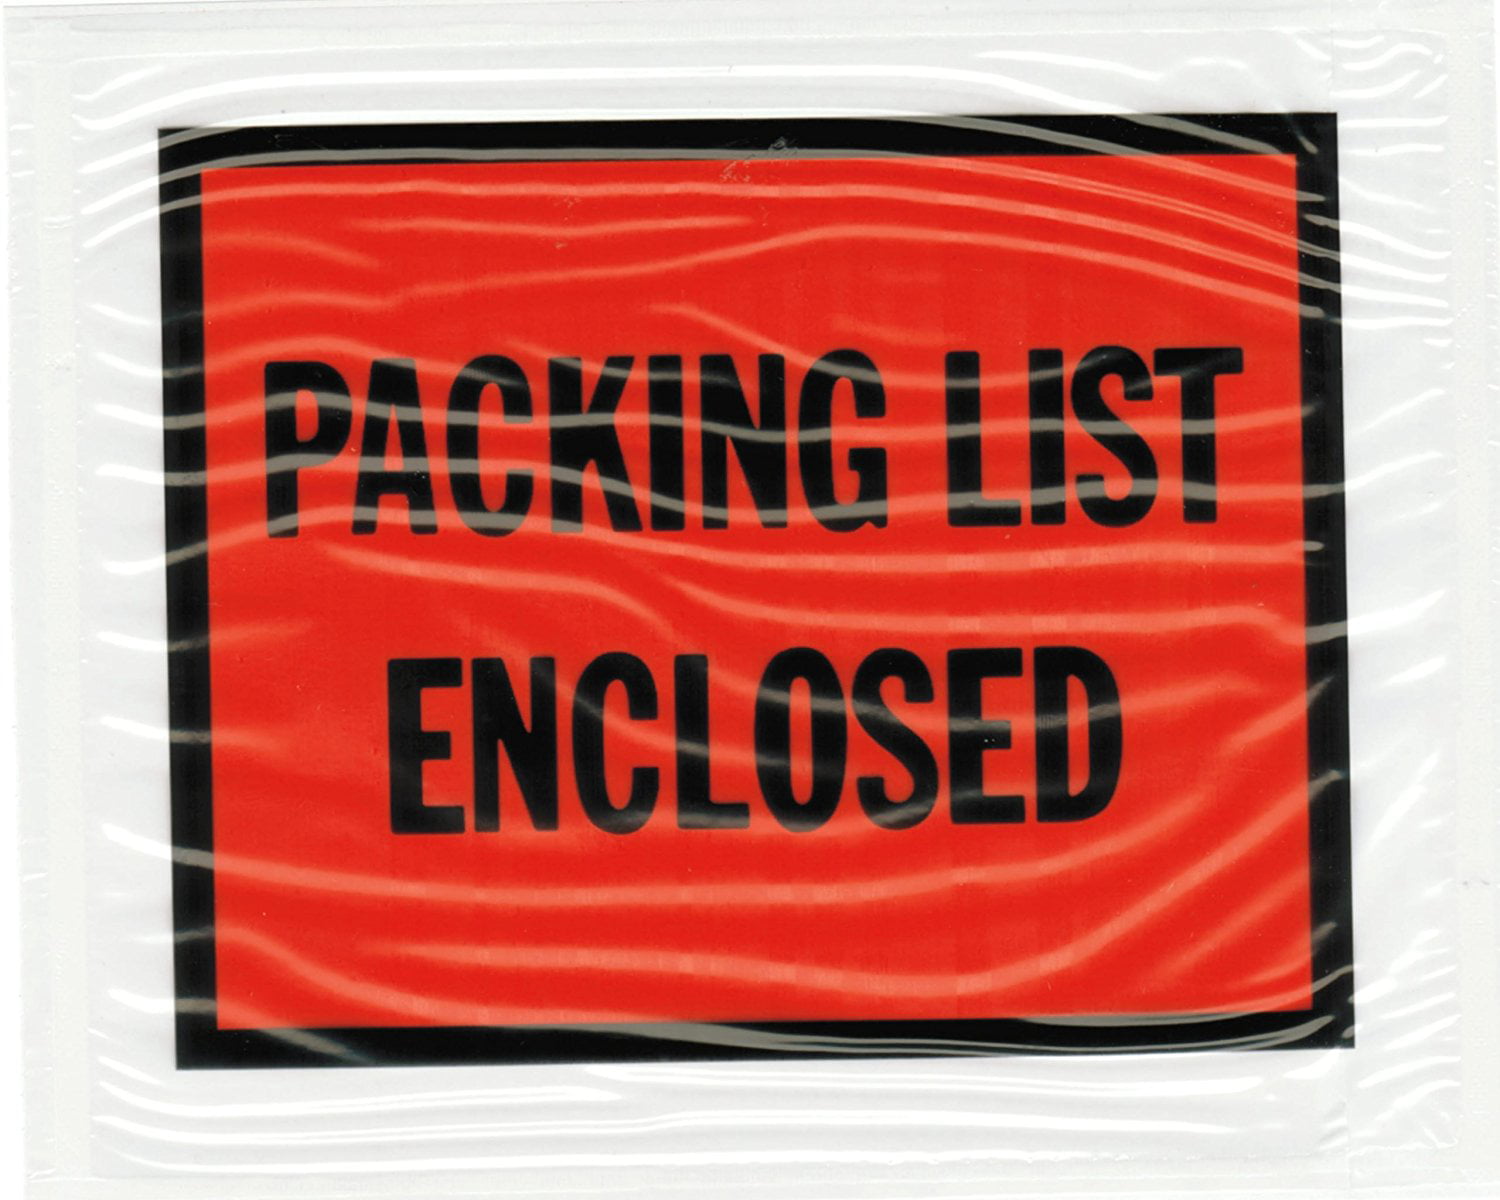 100 Full Face Packing List Enclosed Envelopes 4.5 x 5.5 Inch Packing ...